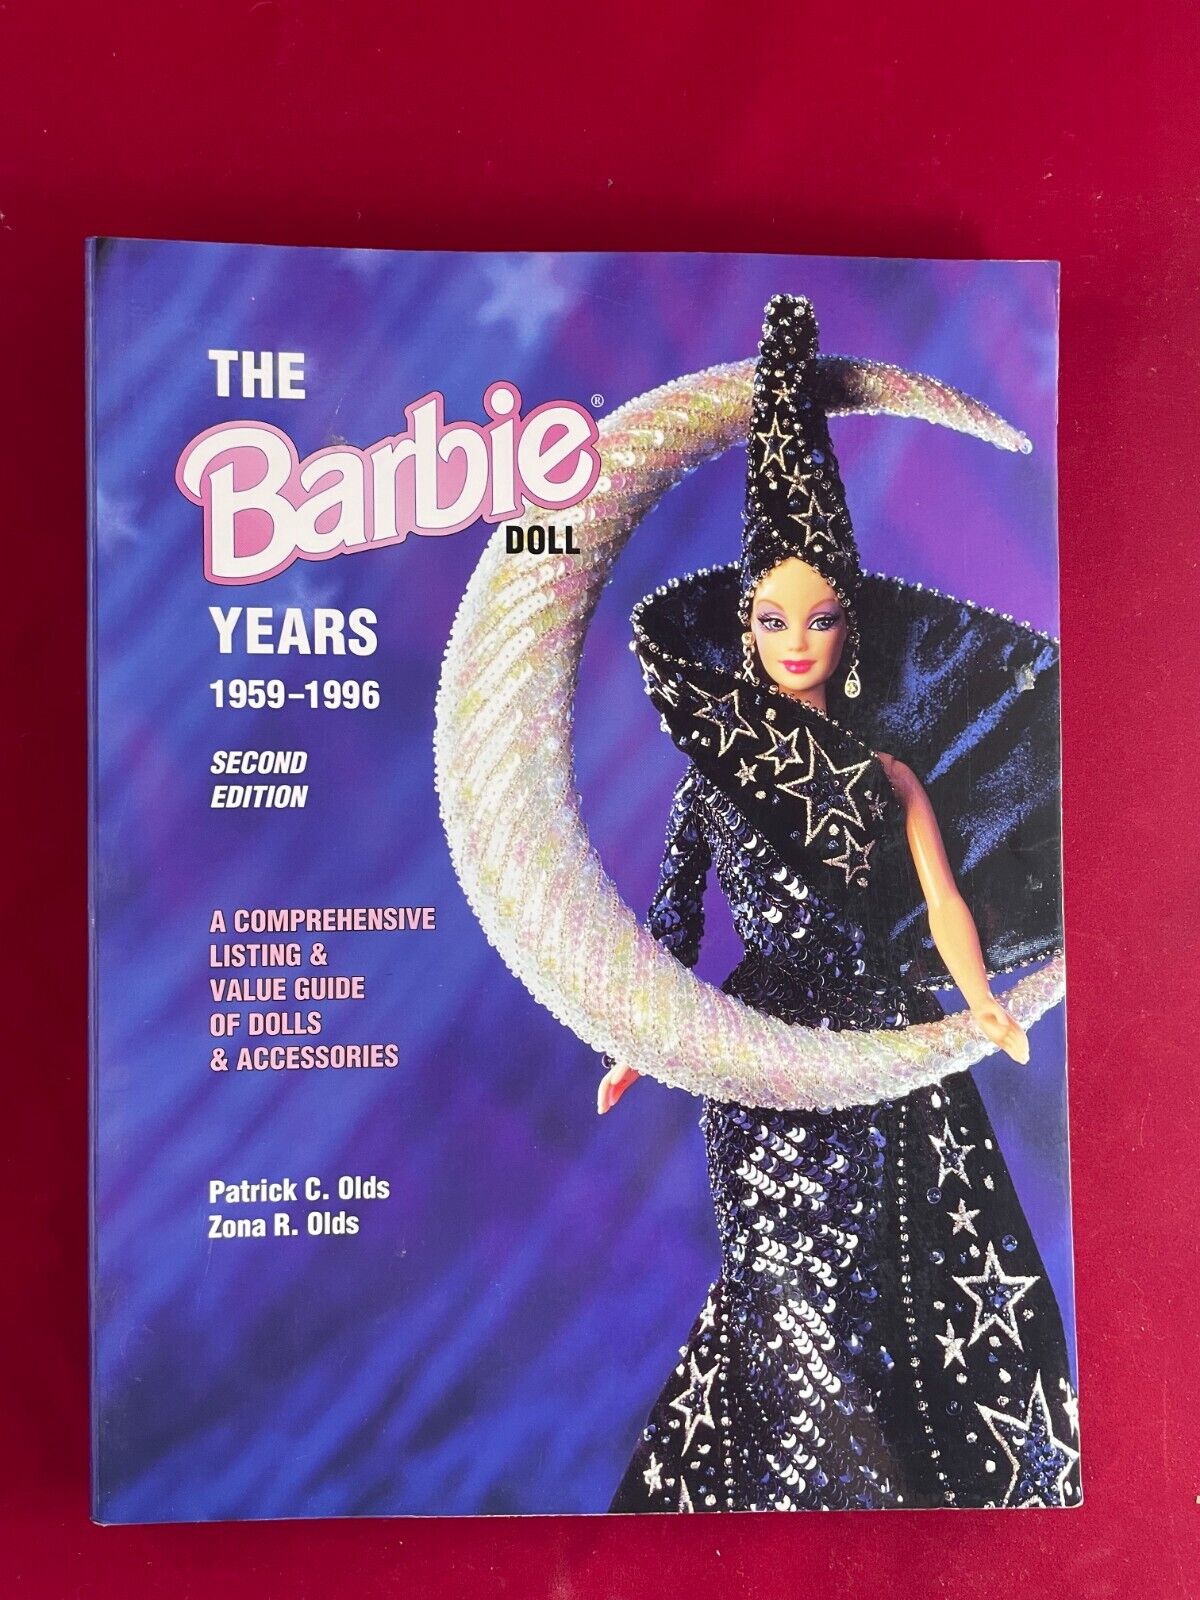 The Barbie Doll Years - Second Edition - 1959-1996